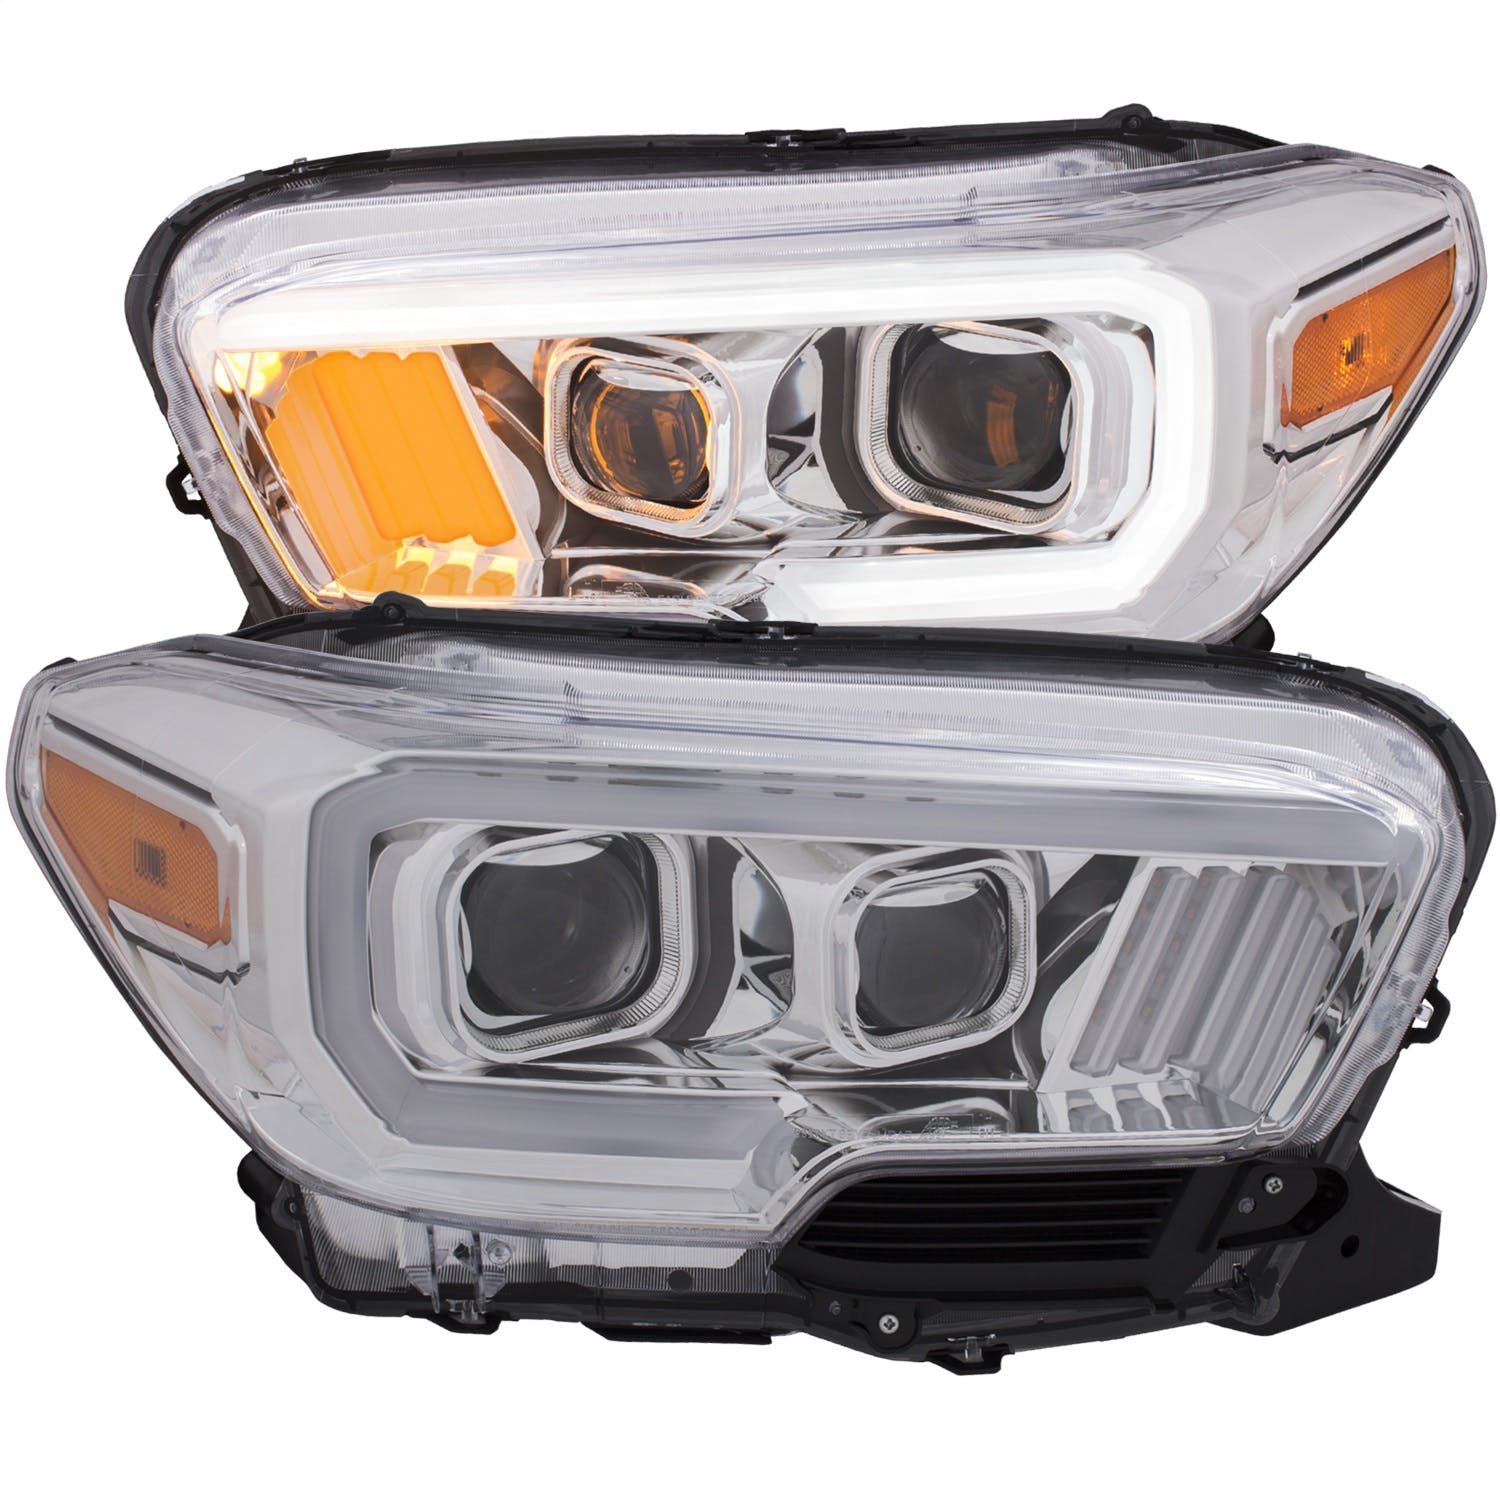 AnzoUSA 111378 Projector Headlights with Plank Style Design Chrome with Amber